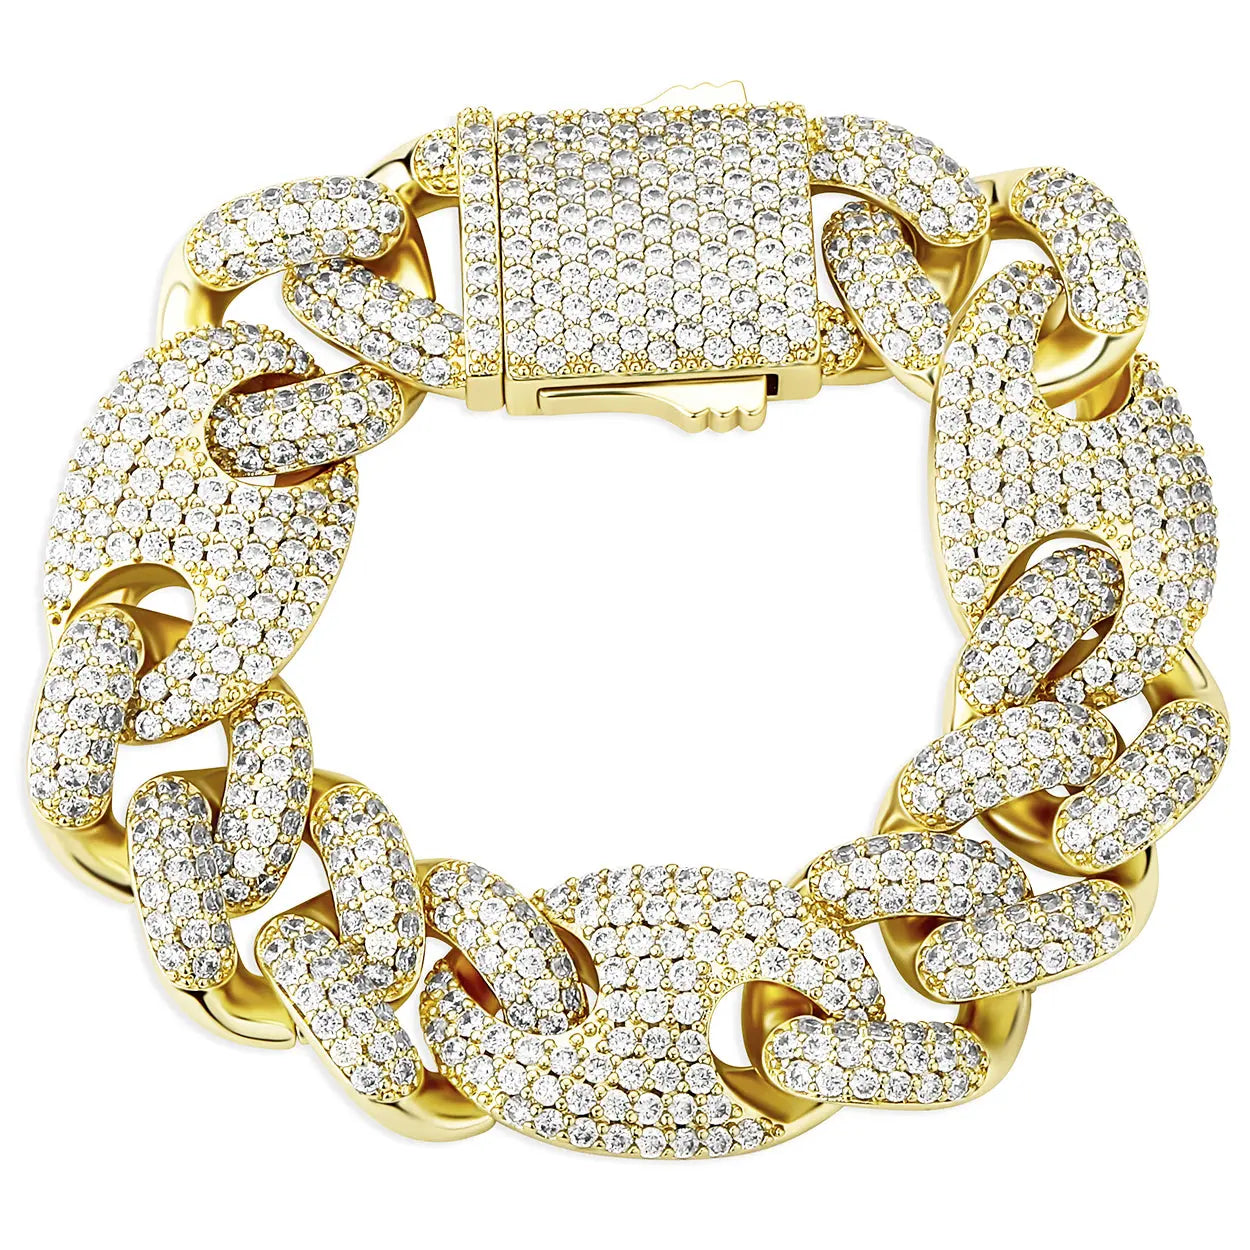 20mm Miami Cuban G-Link Bracelet in Yellow Gold 922.9cm  The Icetruck